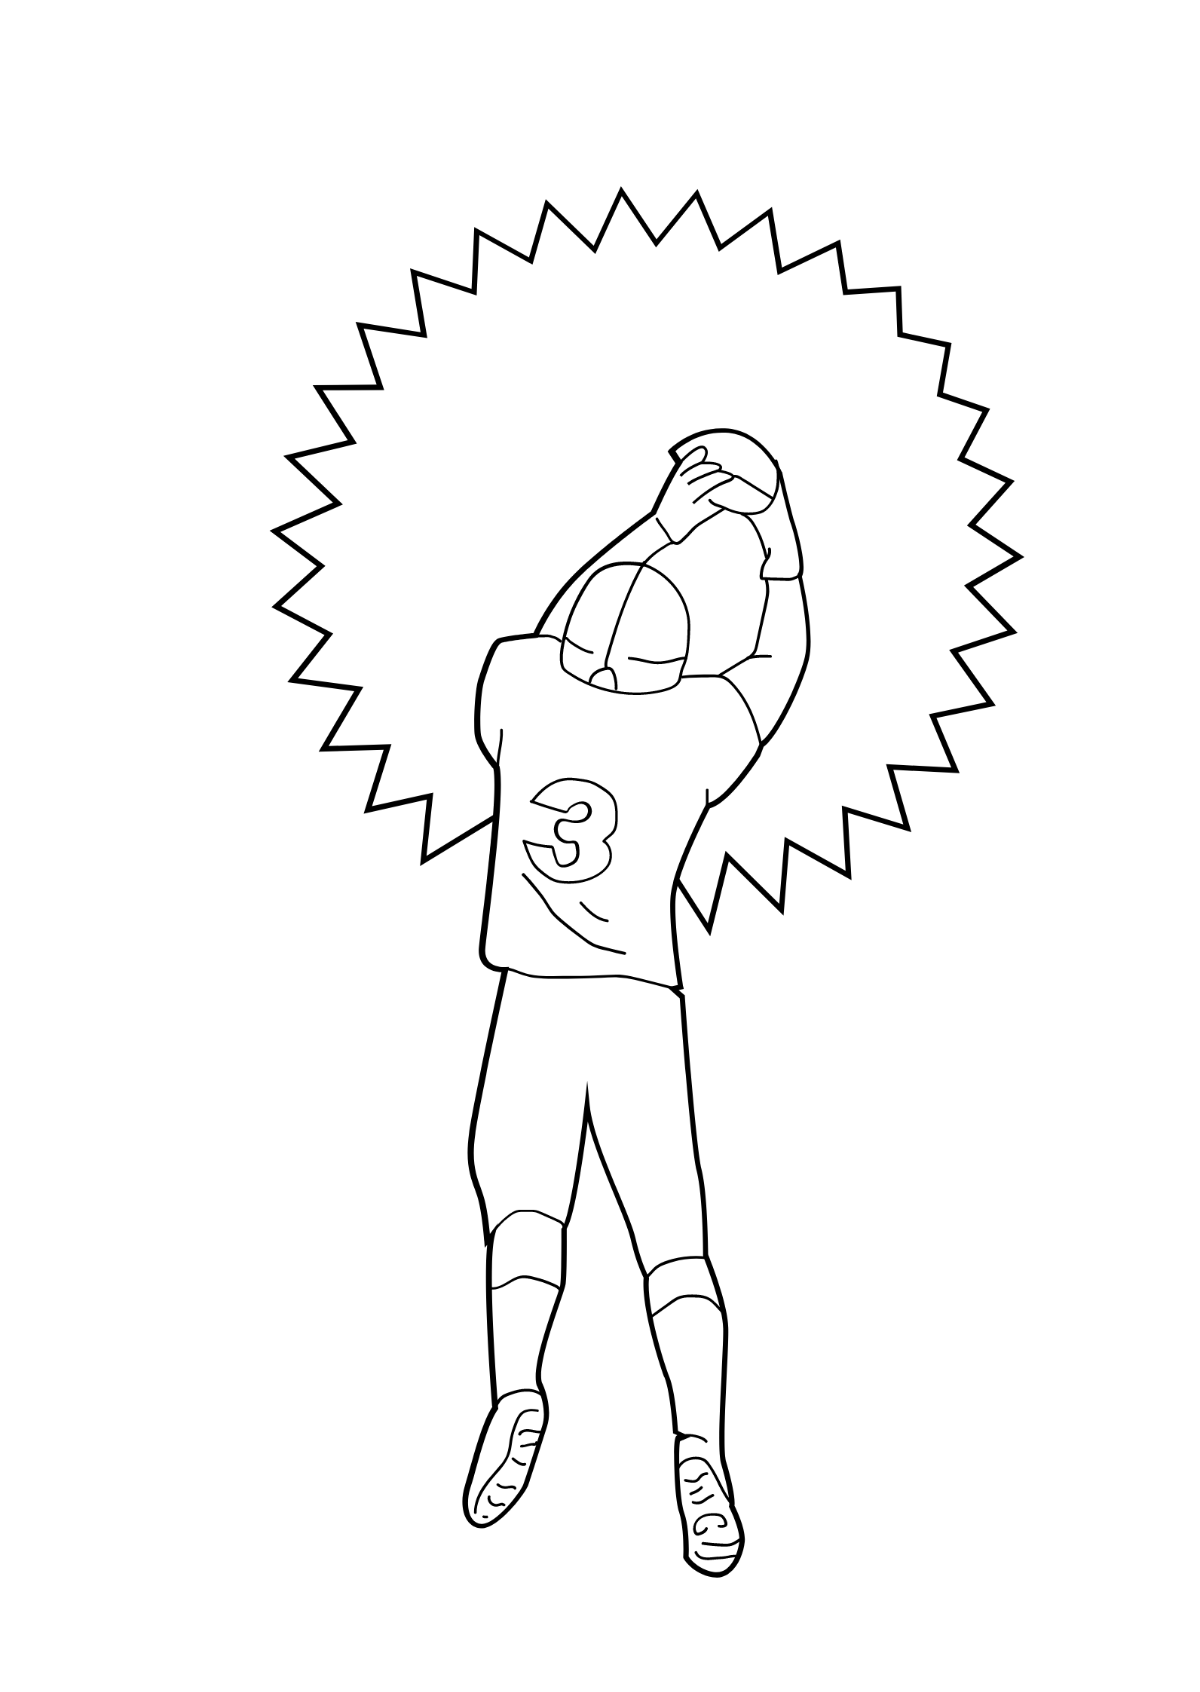 Easy Super Bowl Drawing Template